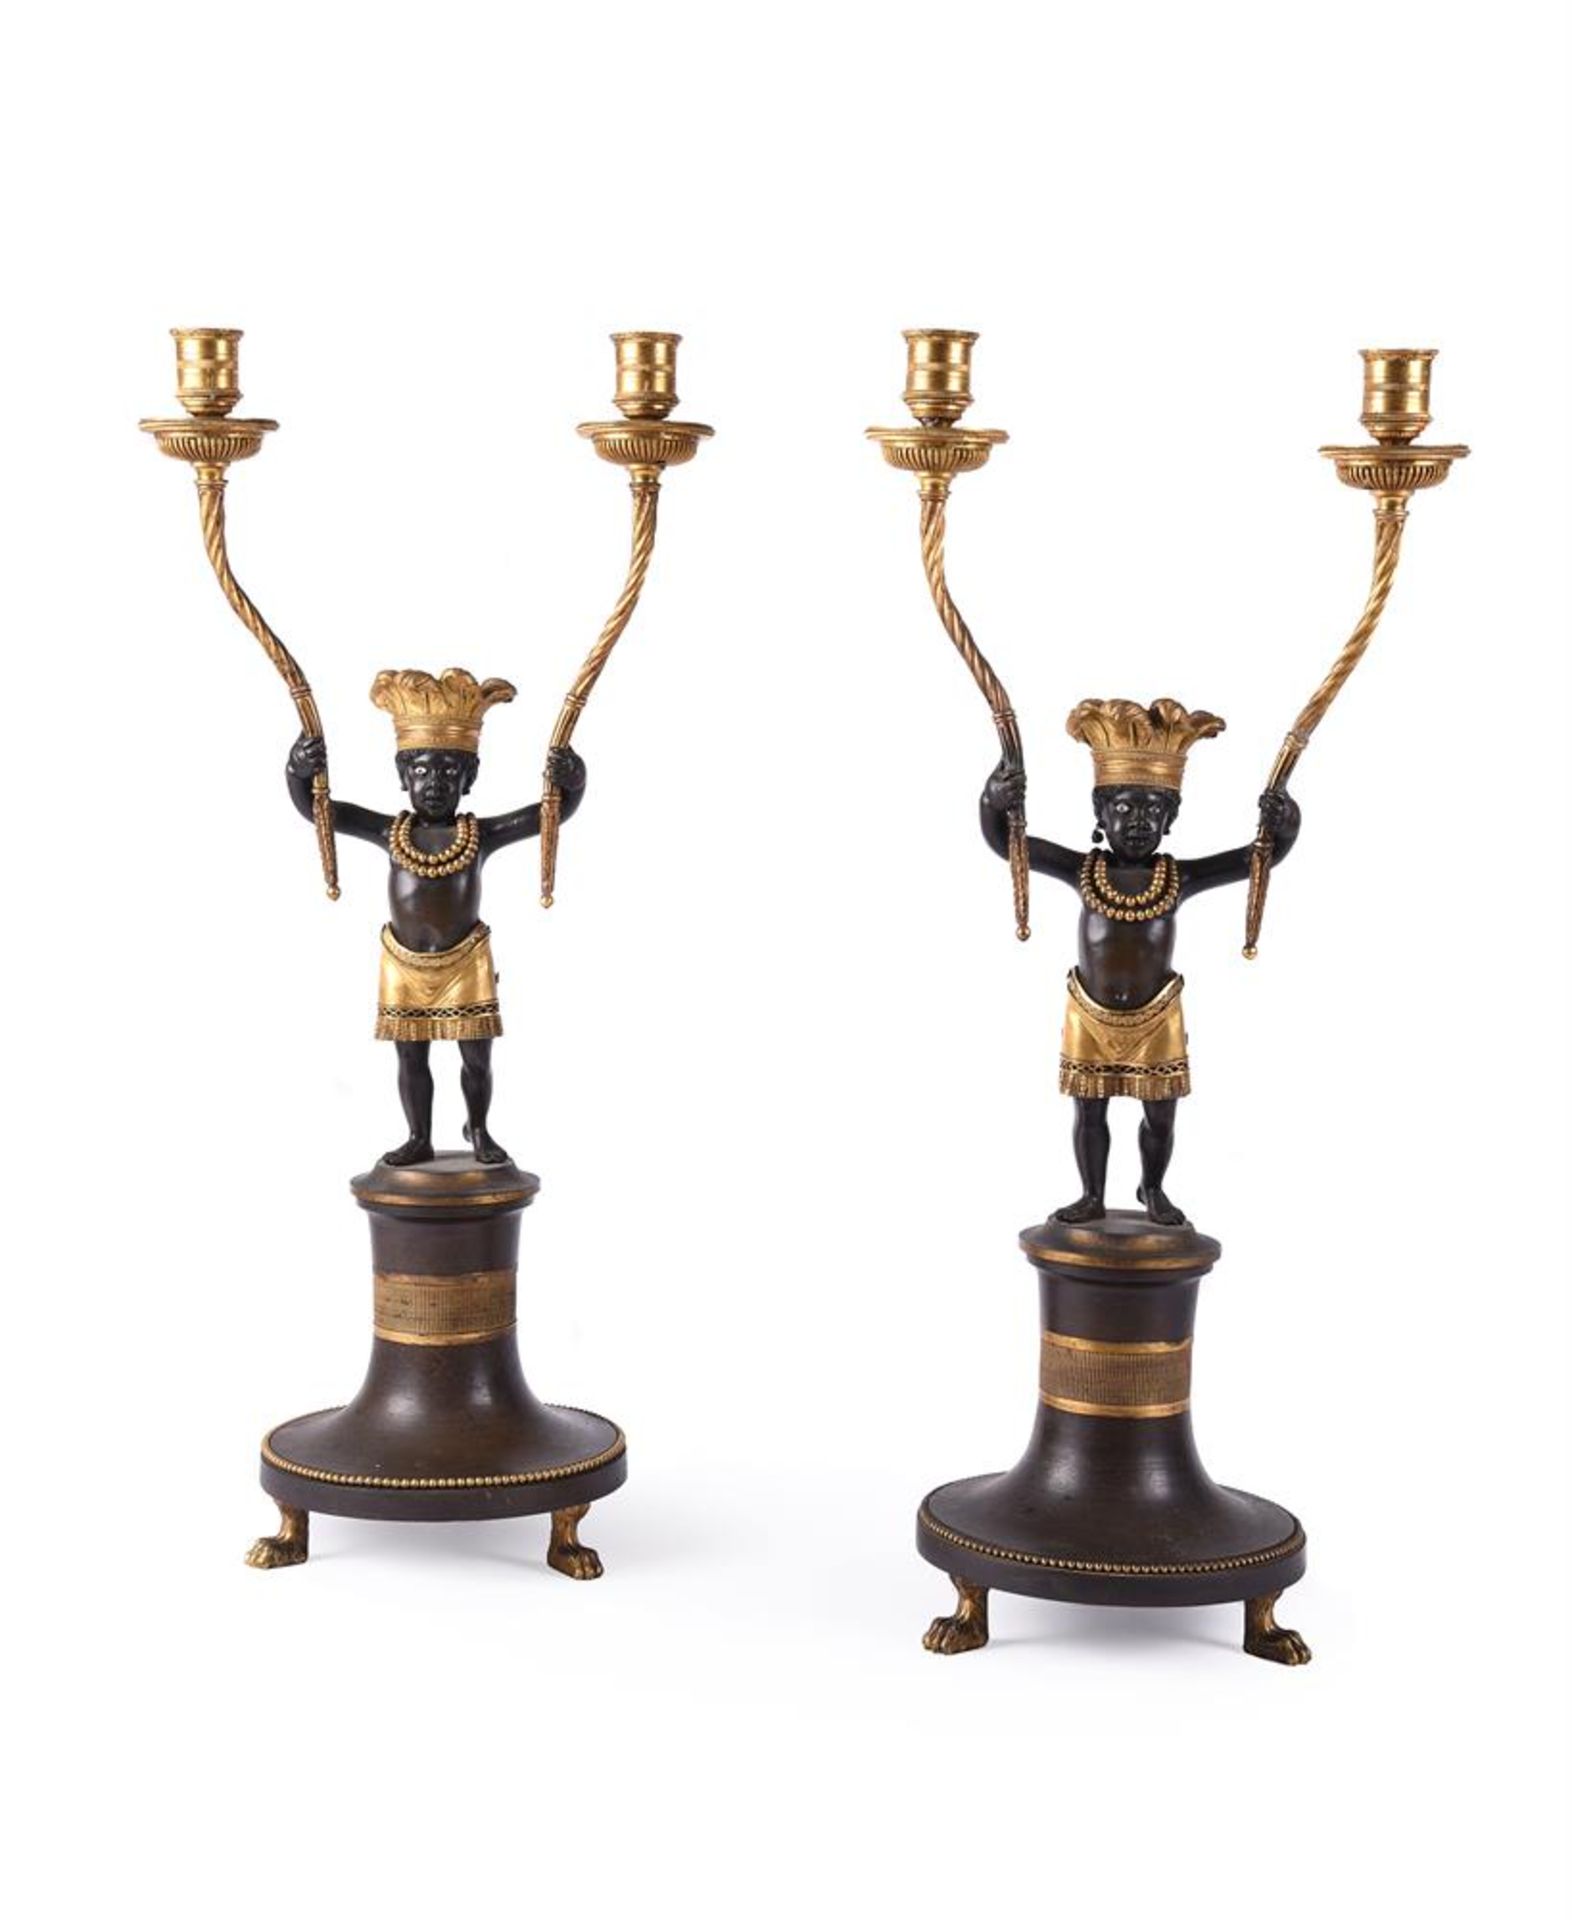 AFTER JEAN-SIMON DEVERBERIE (1764-1824), A RARE PAIR OF ORMOLU AND PATINATED BRONZE CANDELABRA